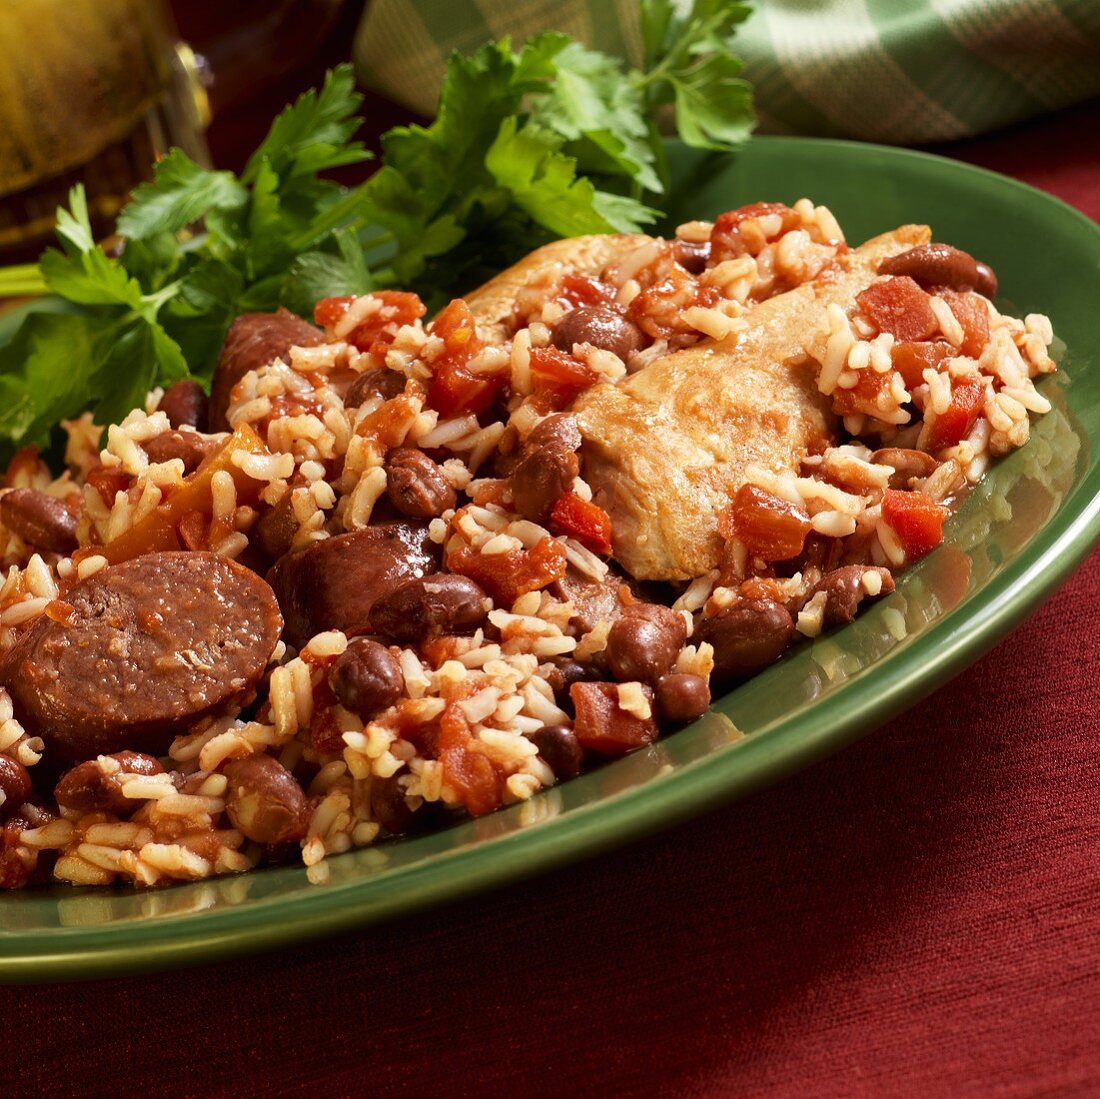 Plate of Red Beans and Rice with Andouille Sausage and Chicken